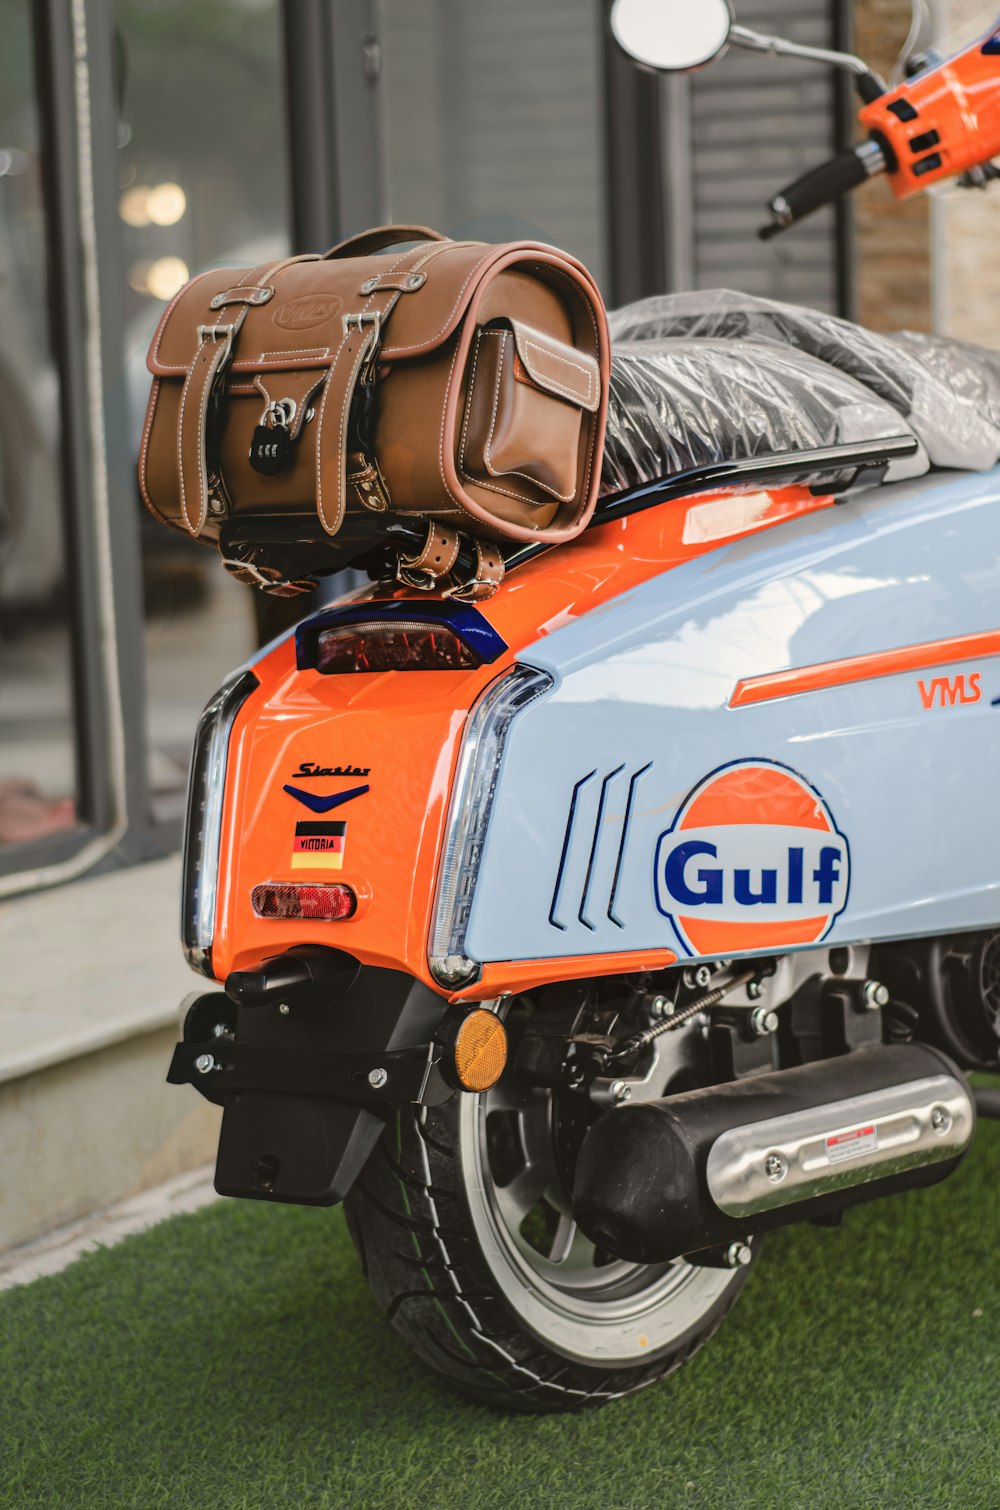 an orange and blue motorcycle with luggage on the back